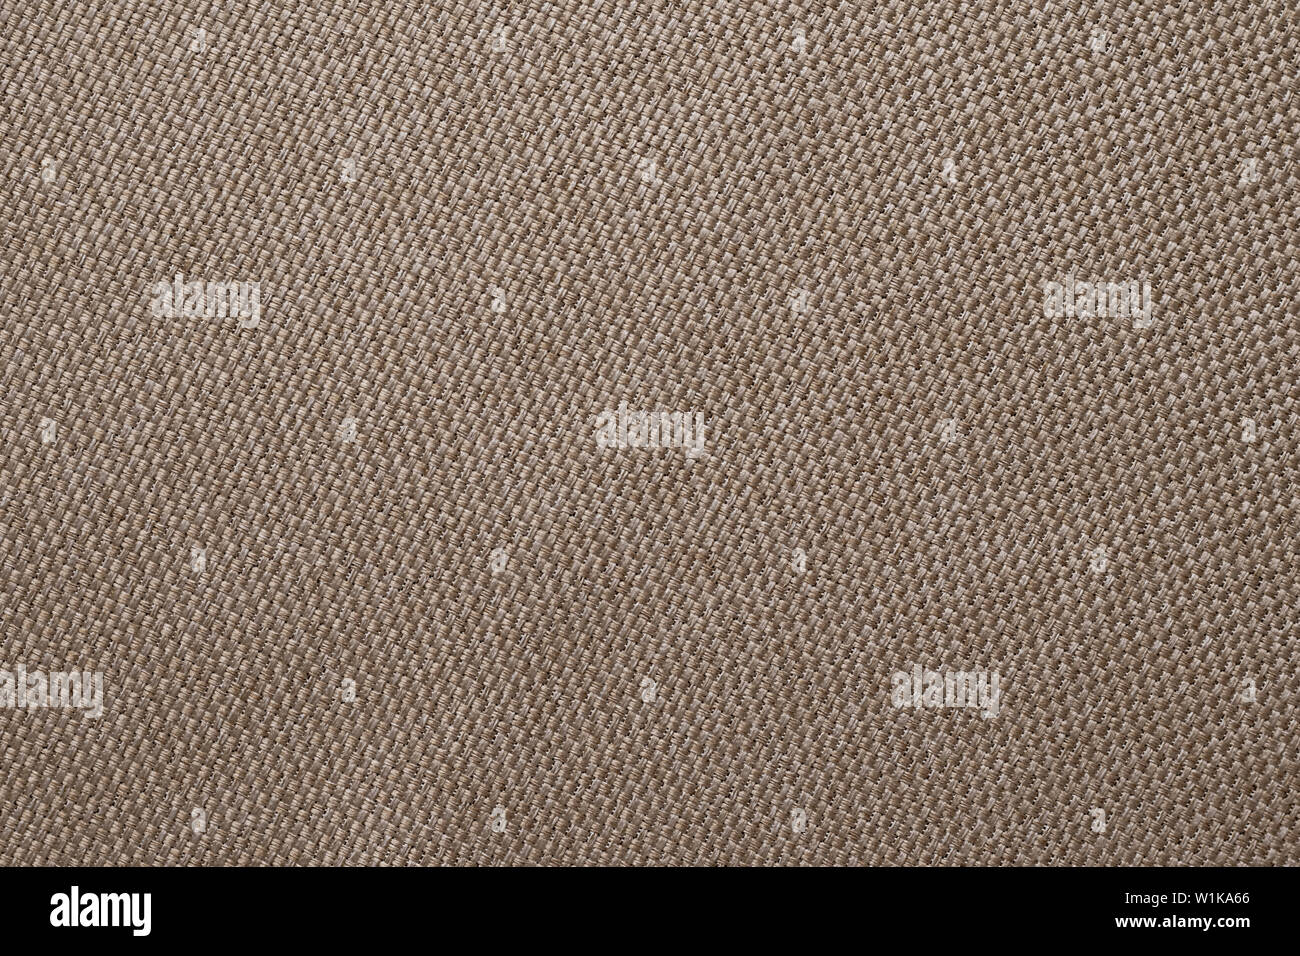 Brown fabric texture of sackcloth. Clothing background. Cloth backdrop. Pattern of sacking, bagging. Linen fabric surface close-up. Stock Photo